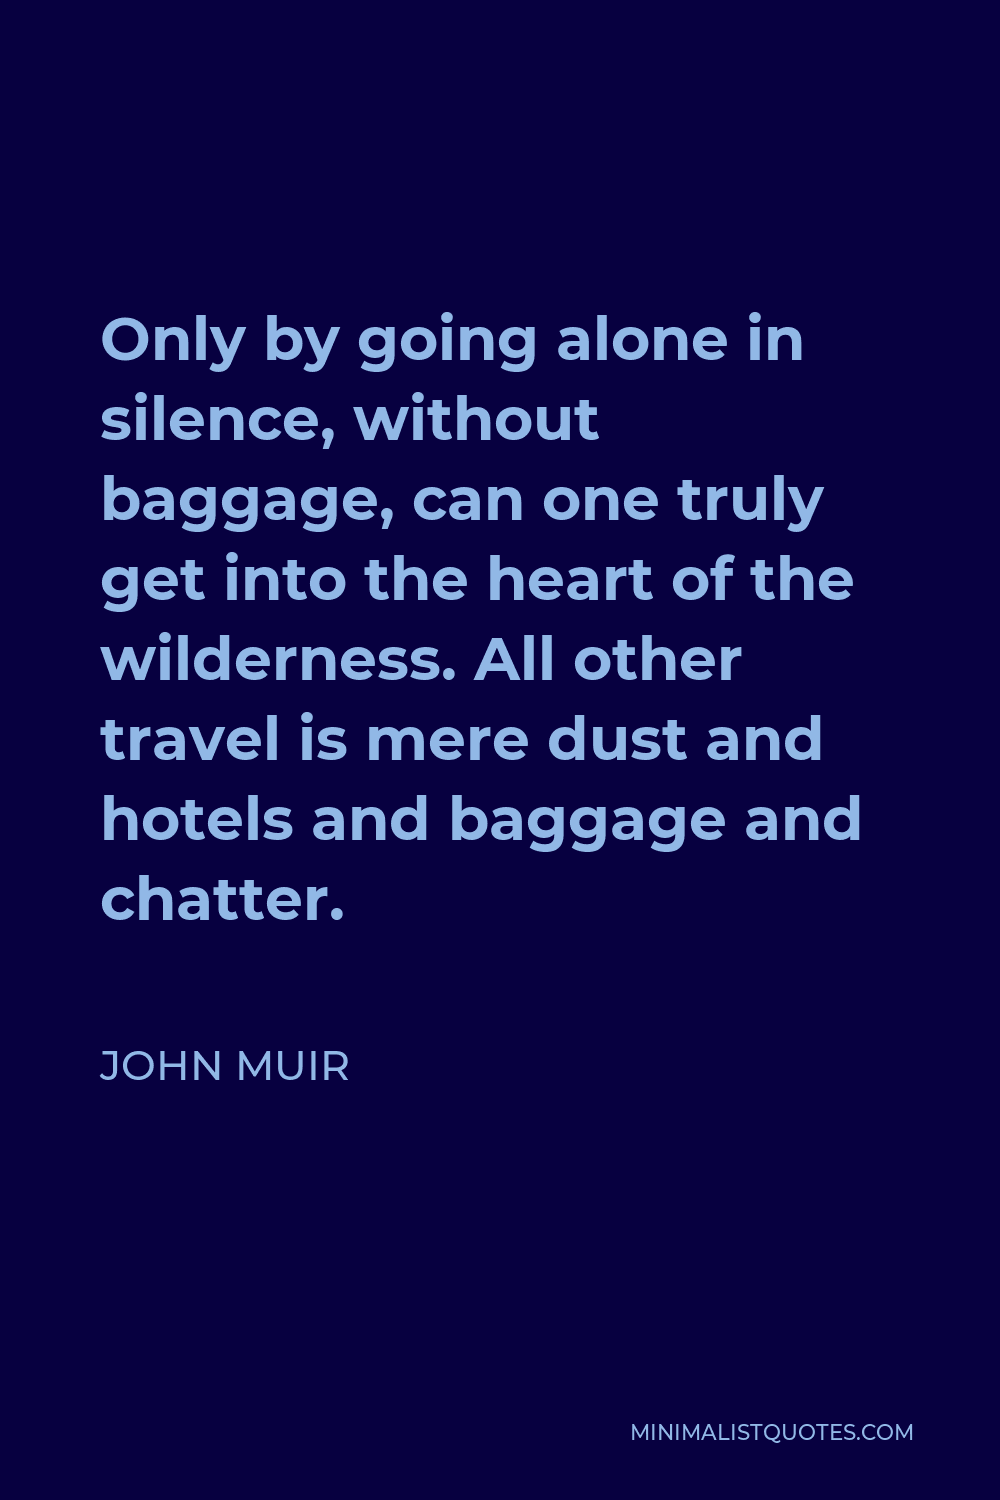 John Muir Quote - Only by going alone in silence, without baggage, can one truly get into the heart of the wilderness. All other travel is mere dust and hotels and baggage and chatter.